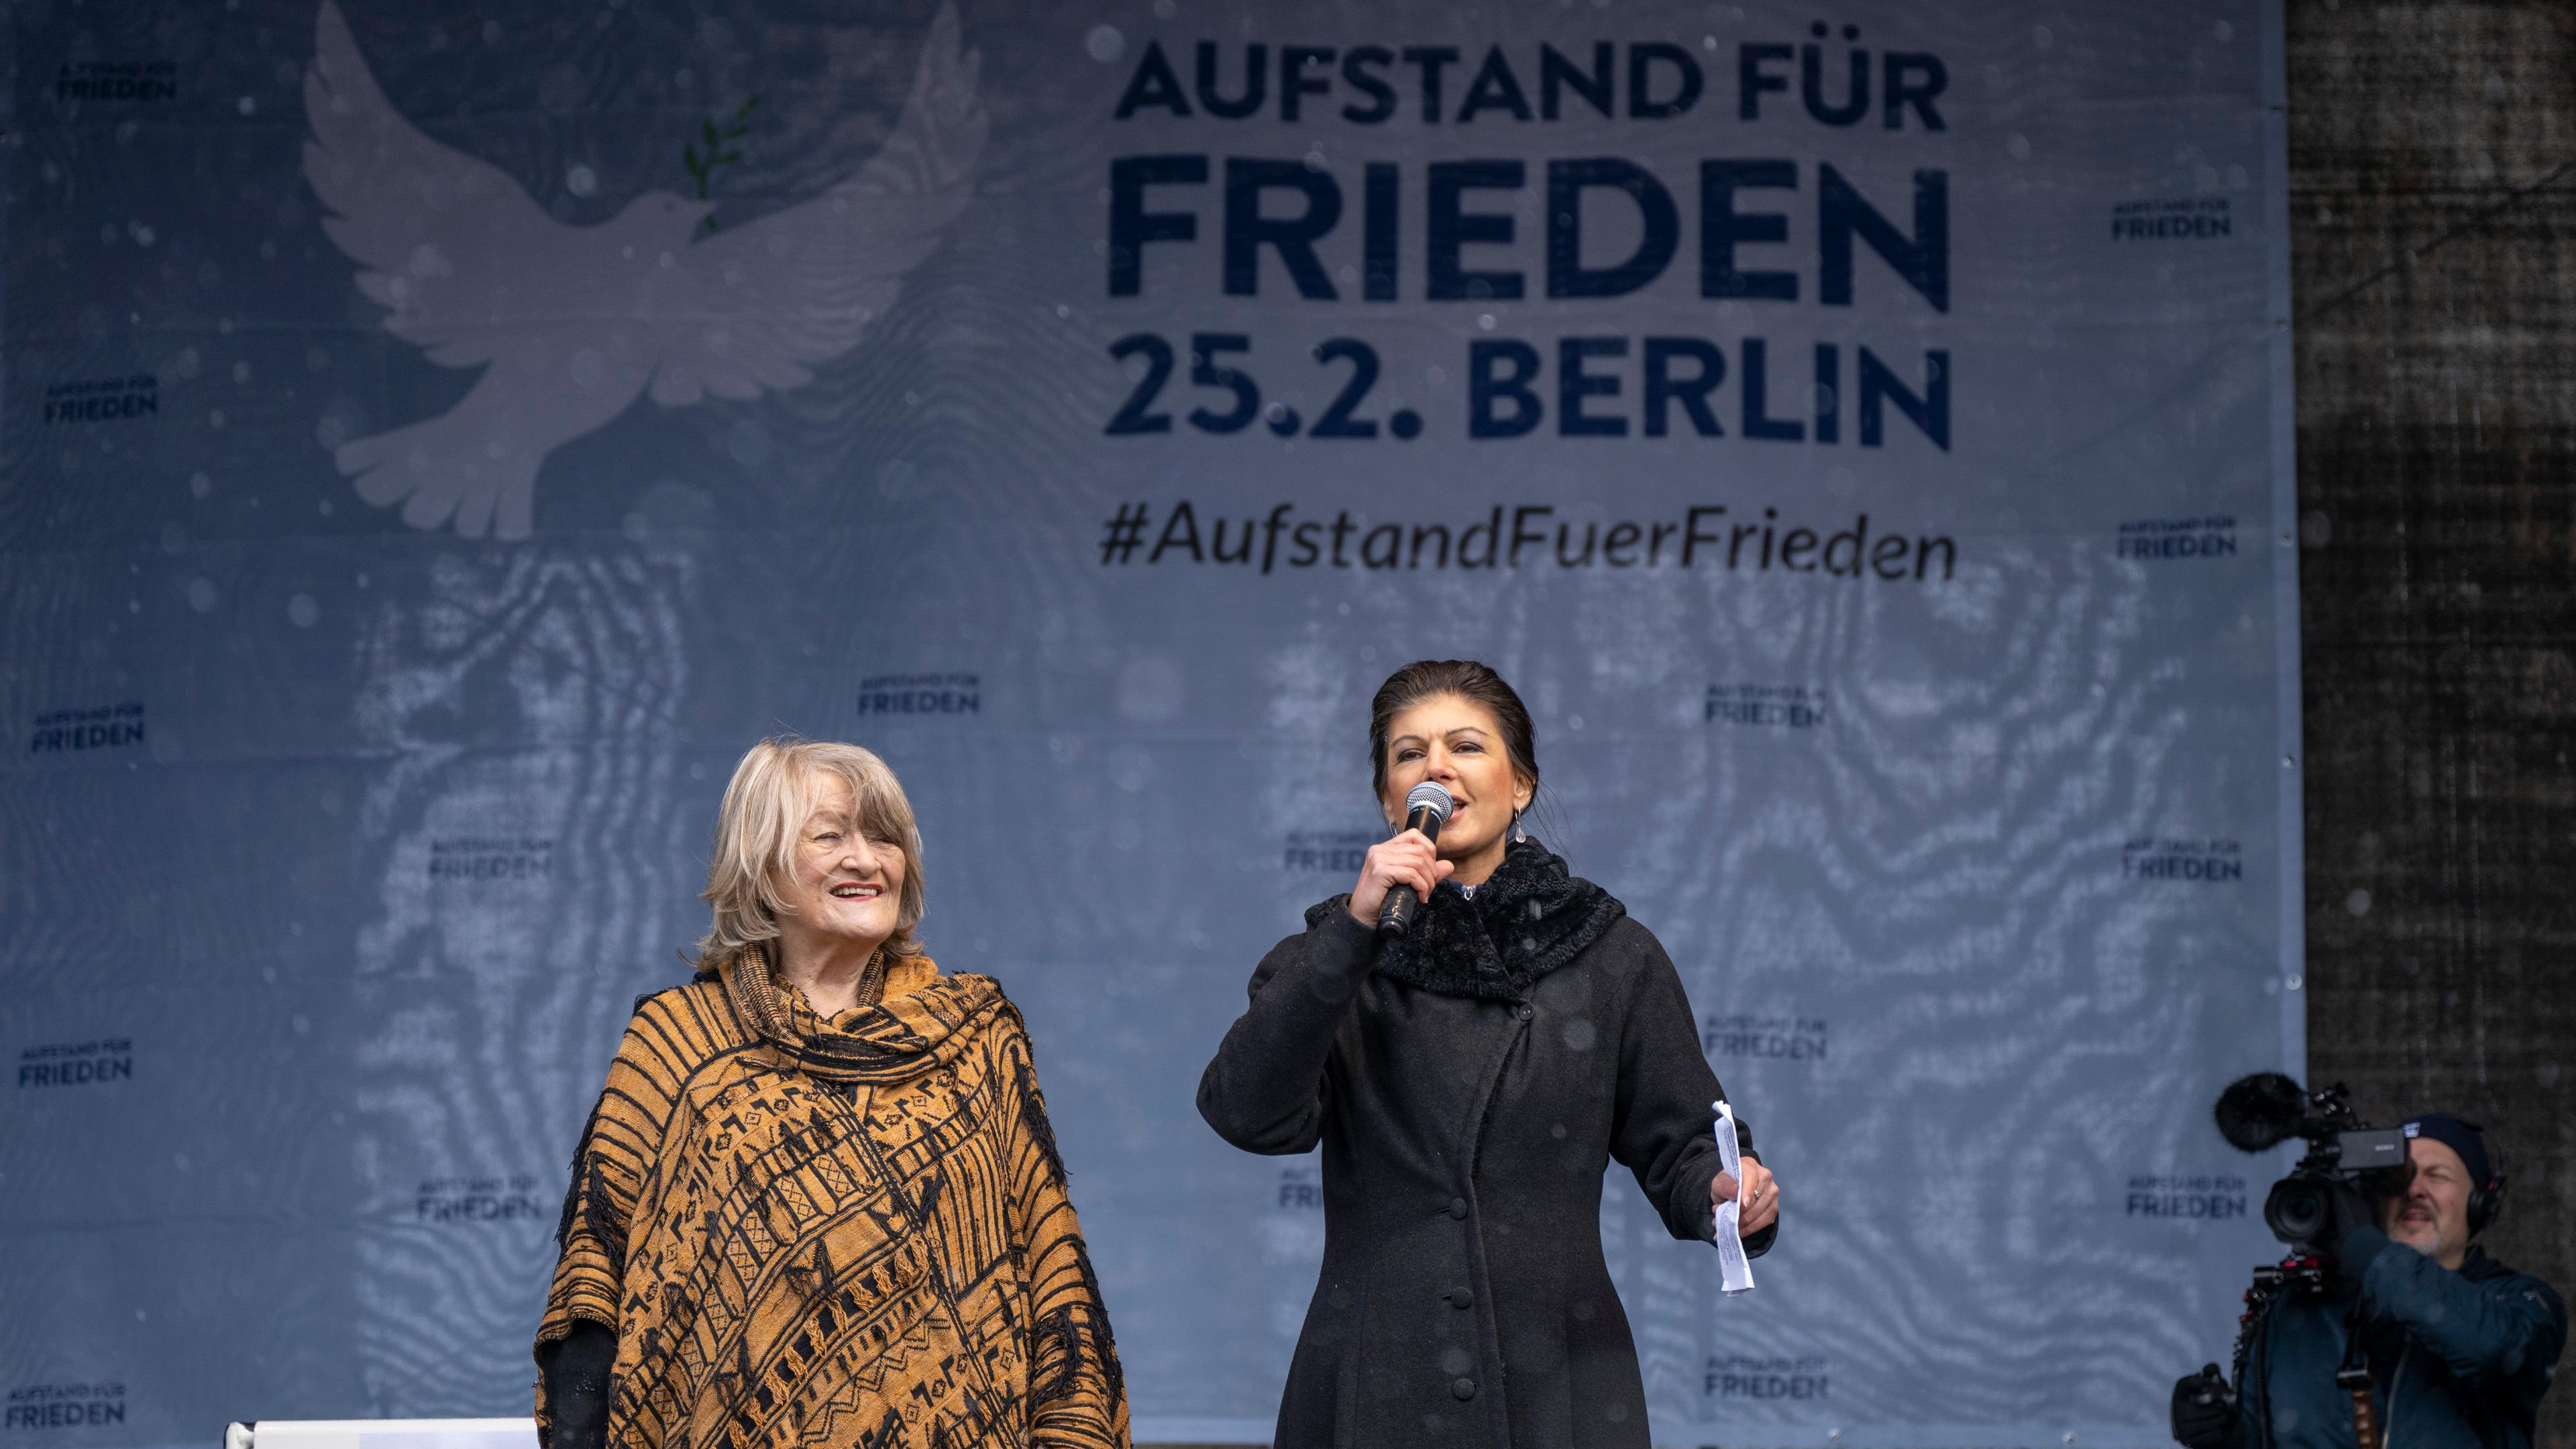 Women's rights activist Alice Schwarzer and left-wing politician Sahra Wagenknecht stand on a stage and speak into a microphone.